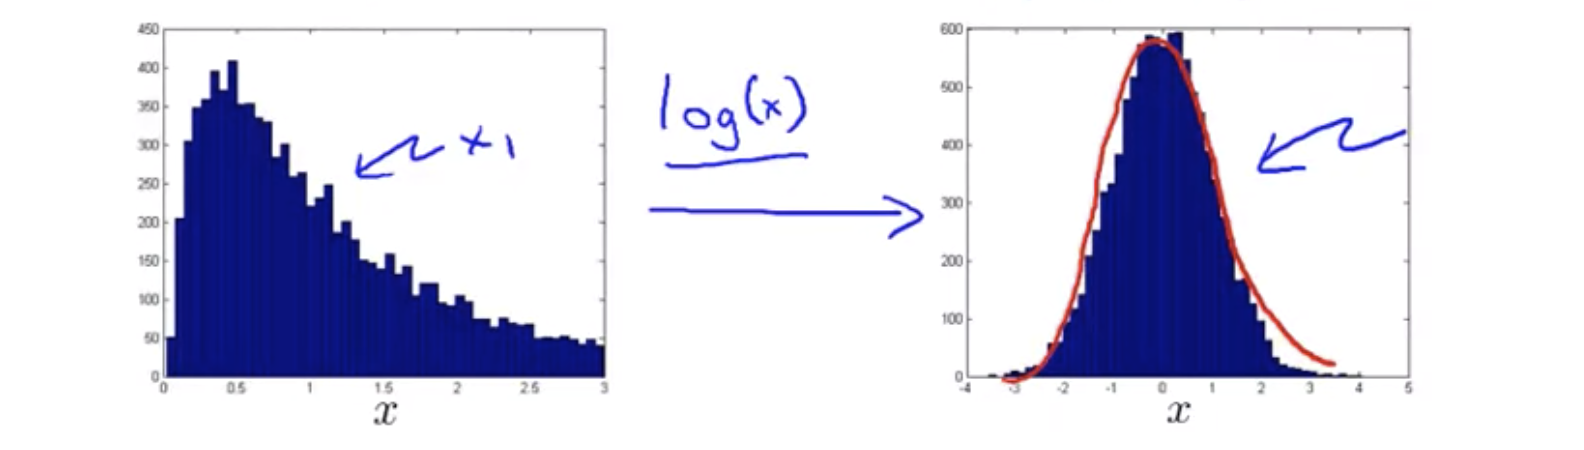 anomaly-detection-features-to-use.png